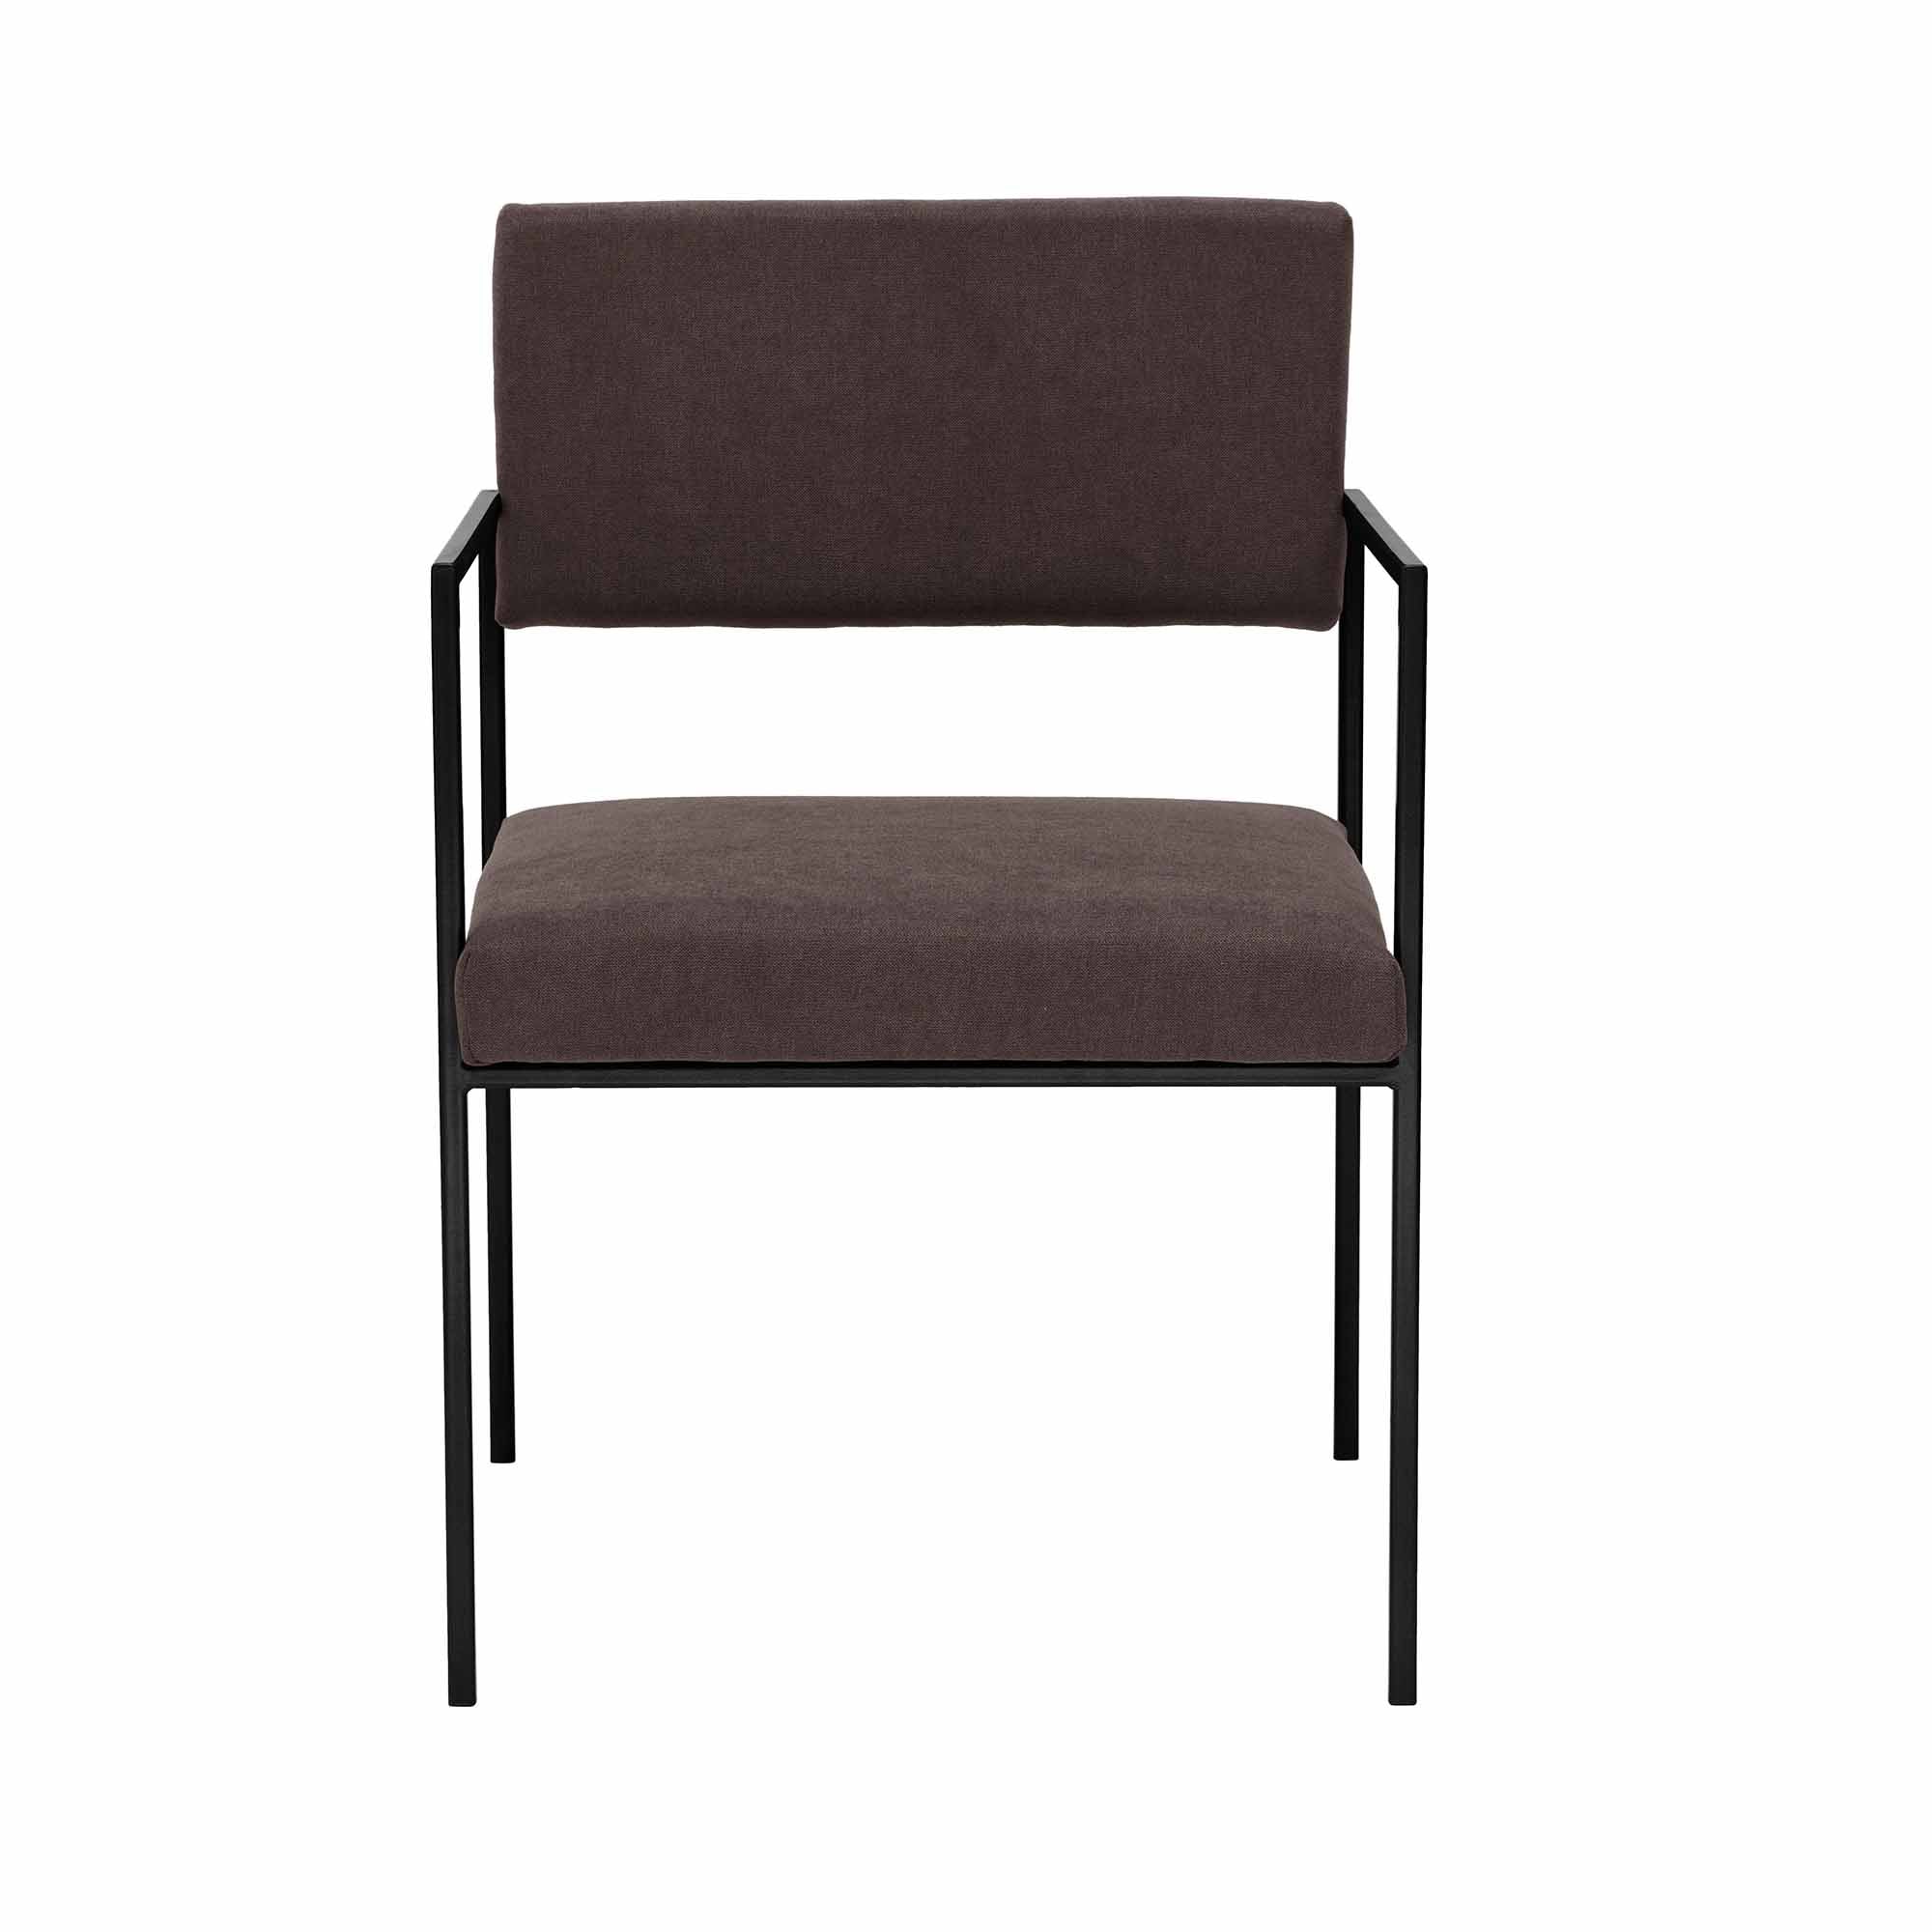 CUBE Armchair, Powder-Coated Steel Frame front view brown fabric, black frame